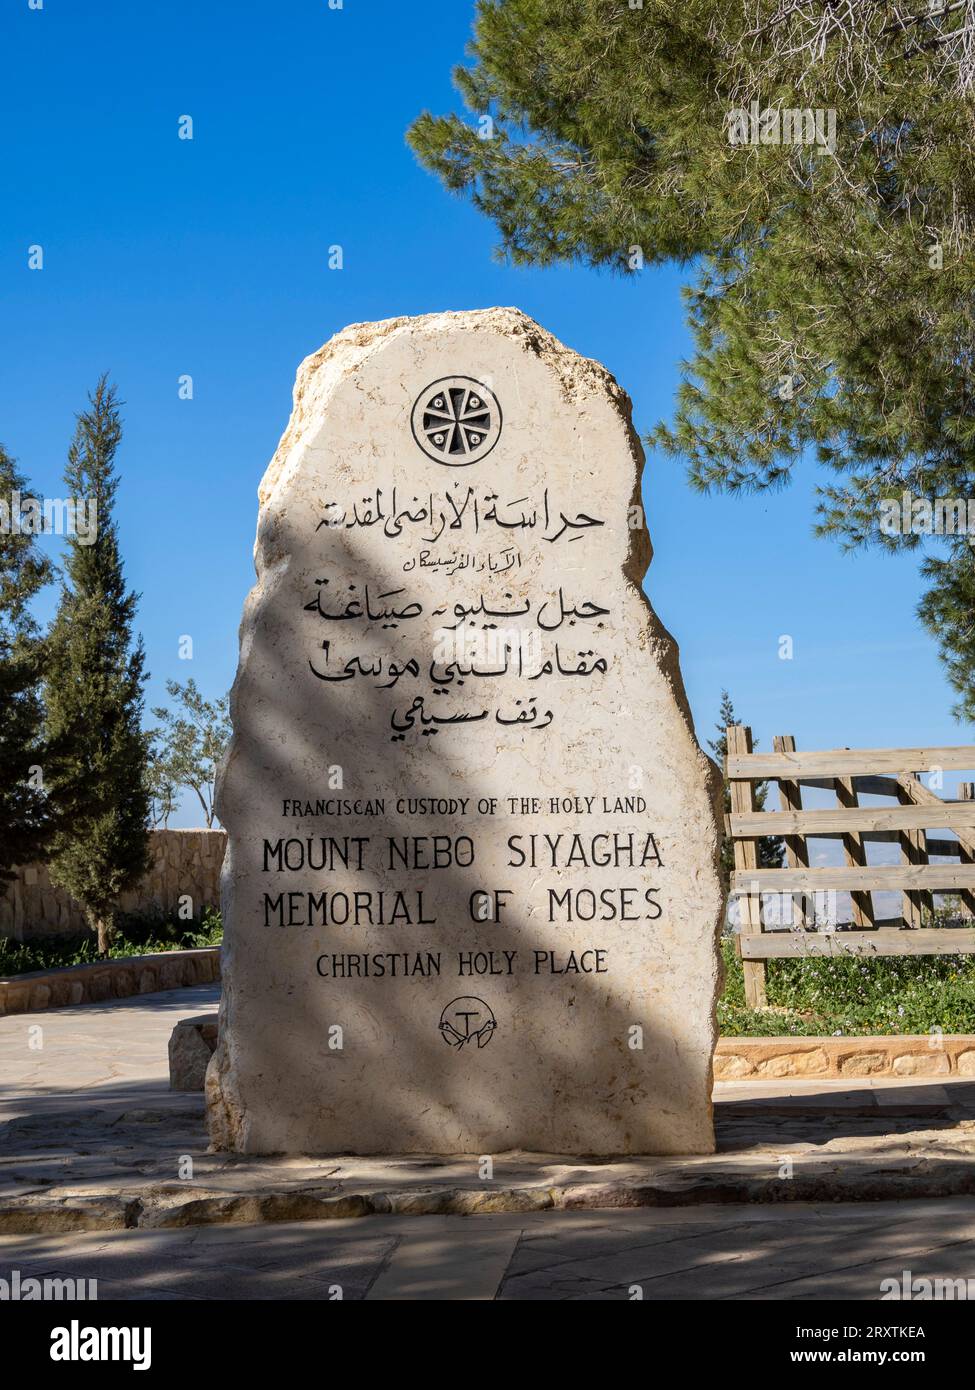 Mount Nebo, mentioned in the Bible as the place where Moses was granted a view of the Promised Land before his death, Jordan, Middle East Stock Photo